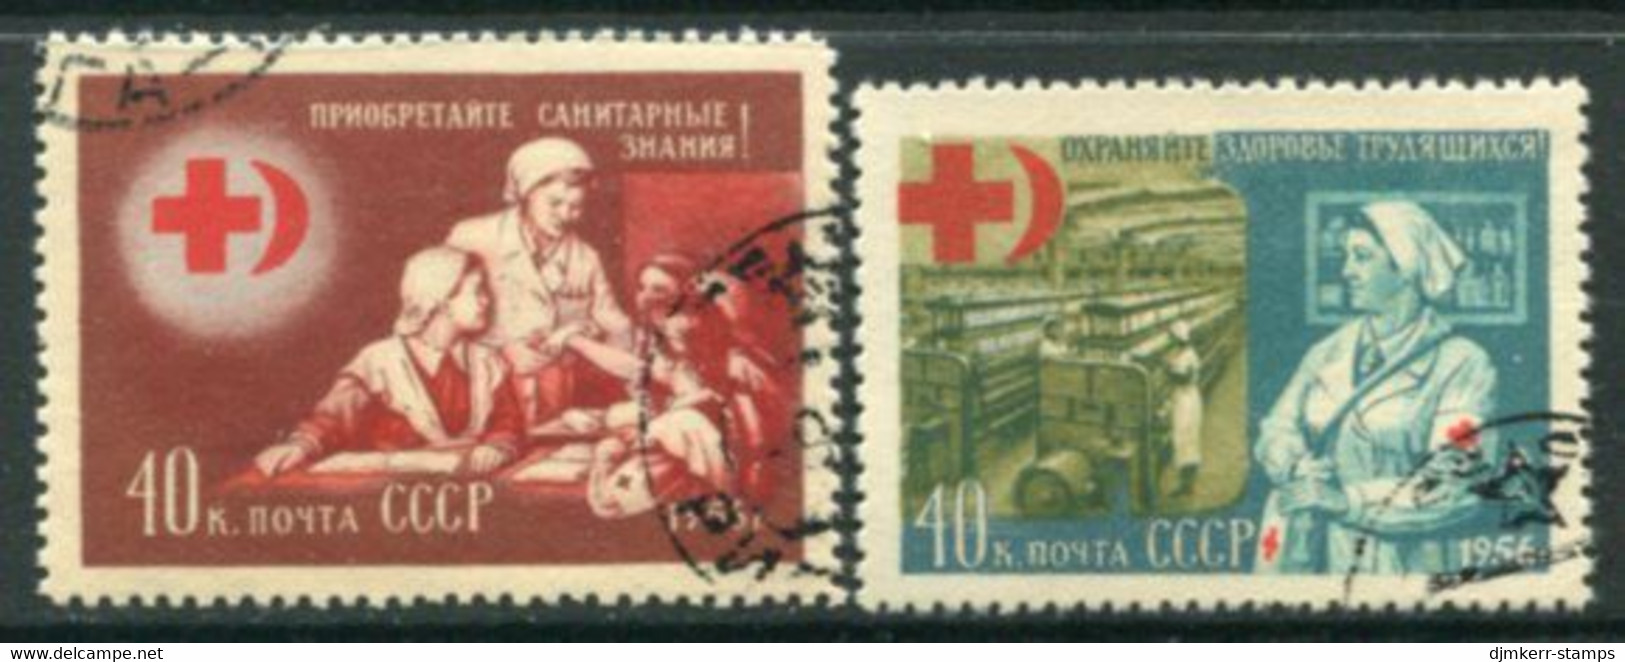 SOVIET UNION 1956 Red Cross / Red Crescent Used.  Michel 1831-32 - Used Stamps